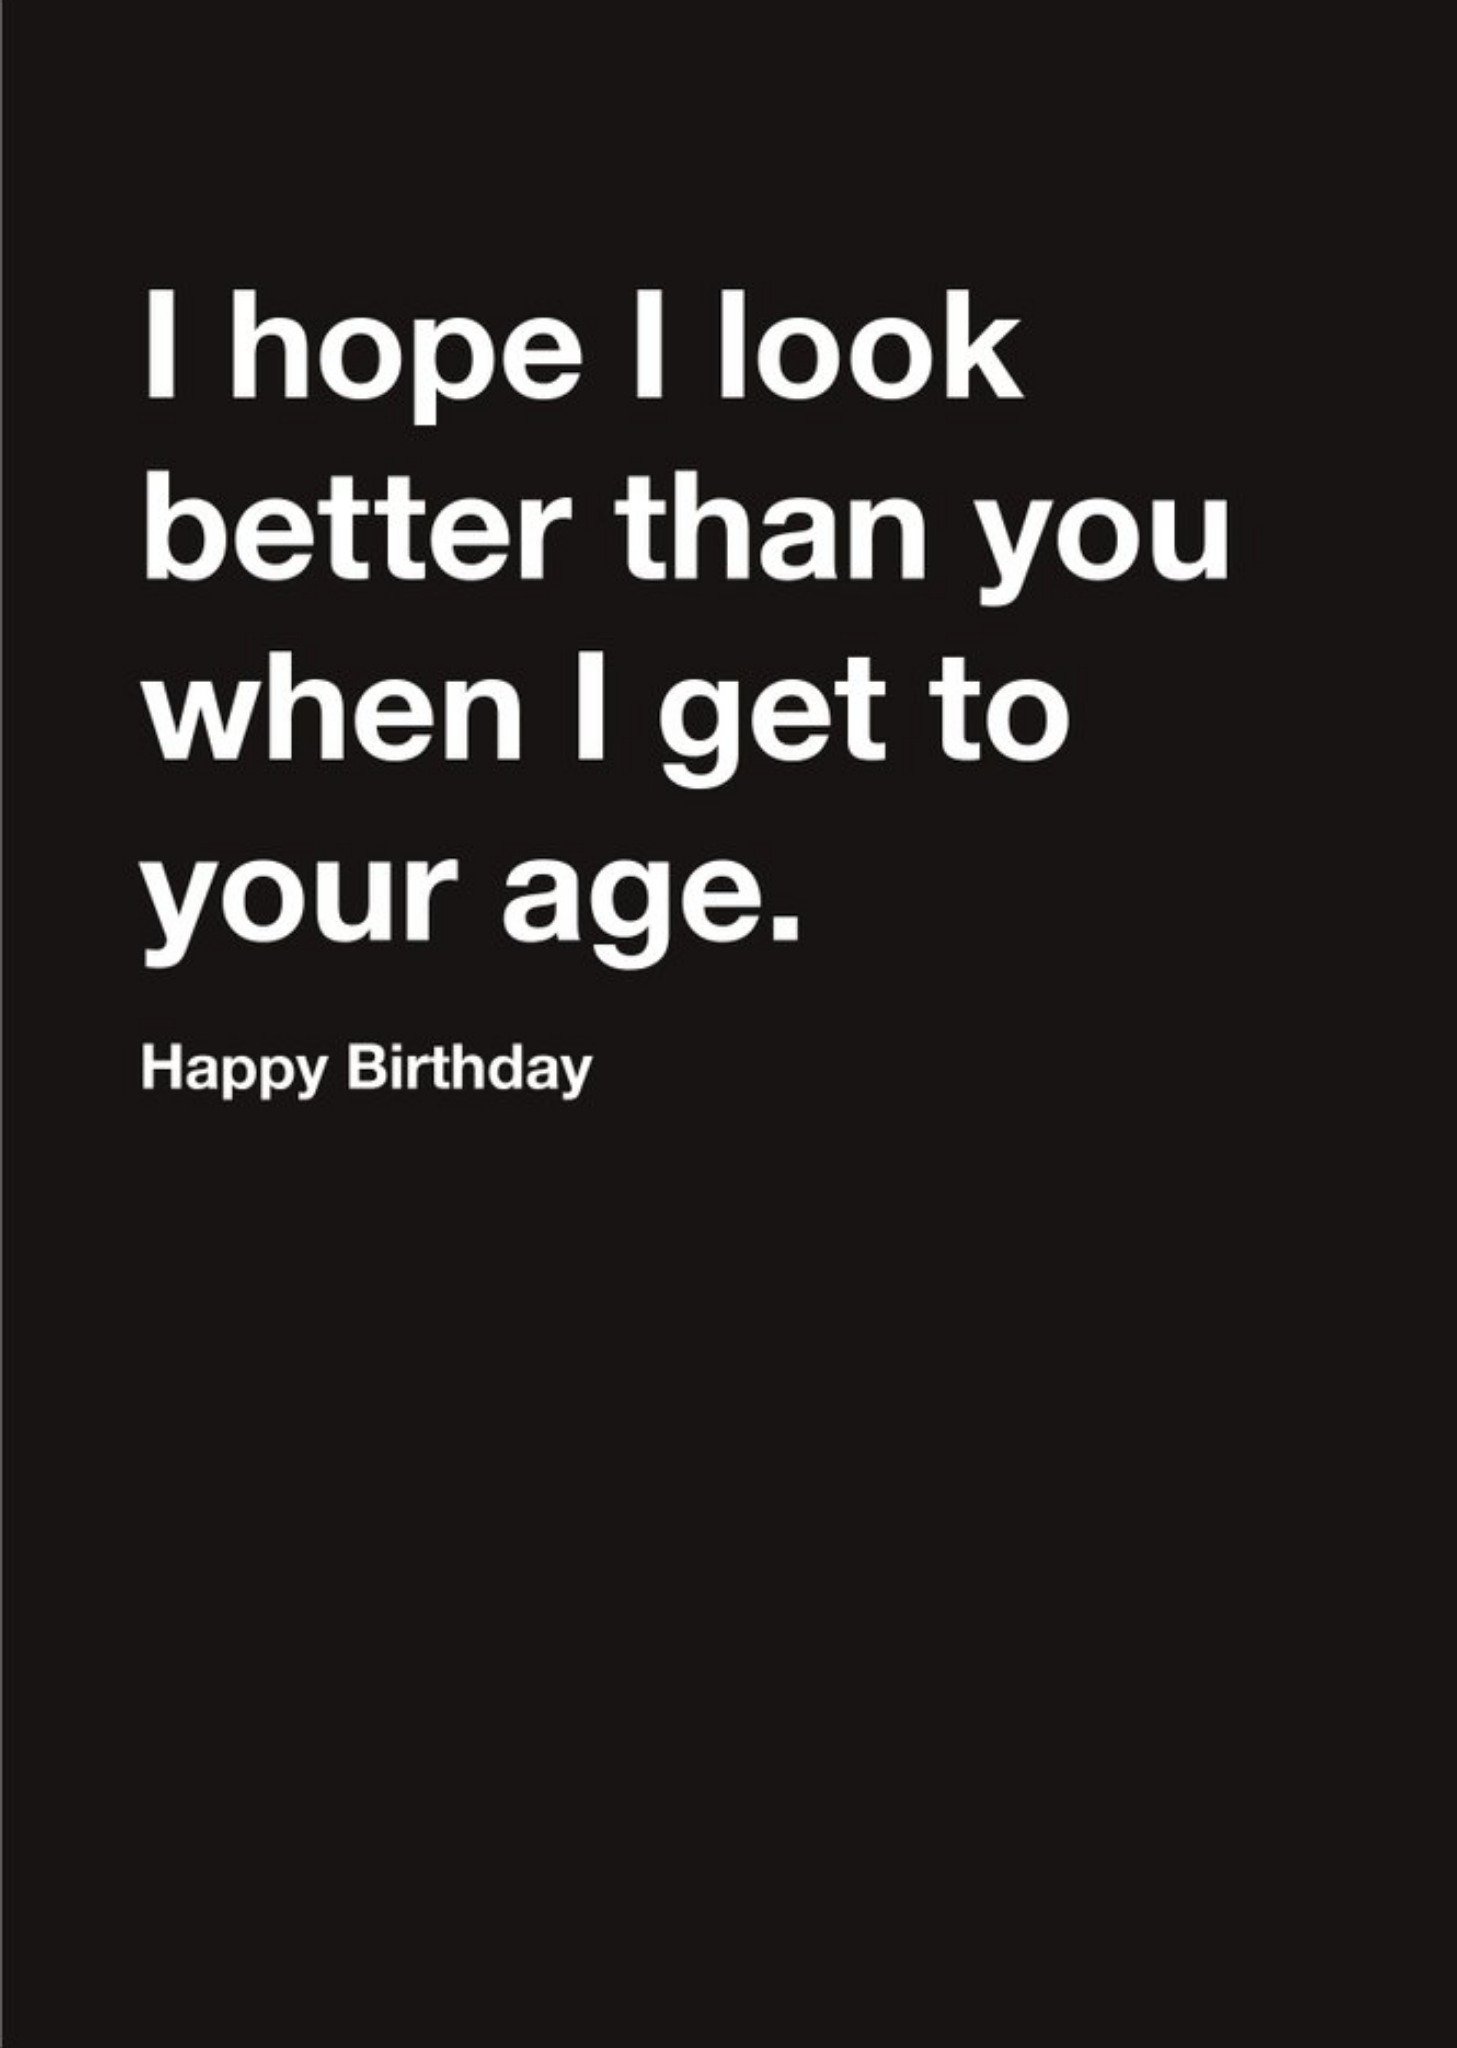 Moonpig Carte Blanche I Hope I Look Better Than You Happy Birthday Card, Large